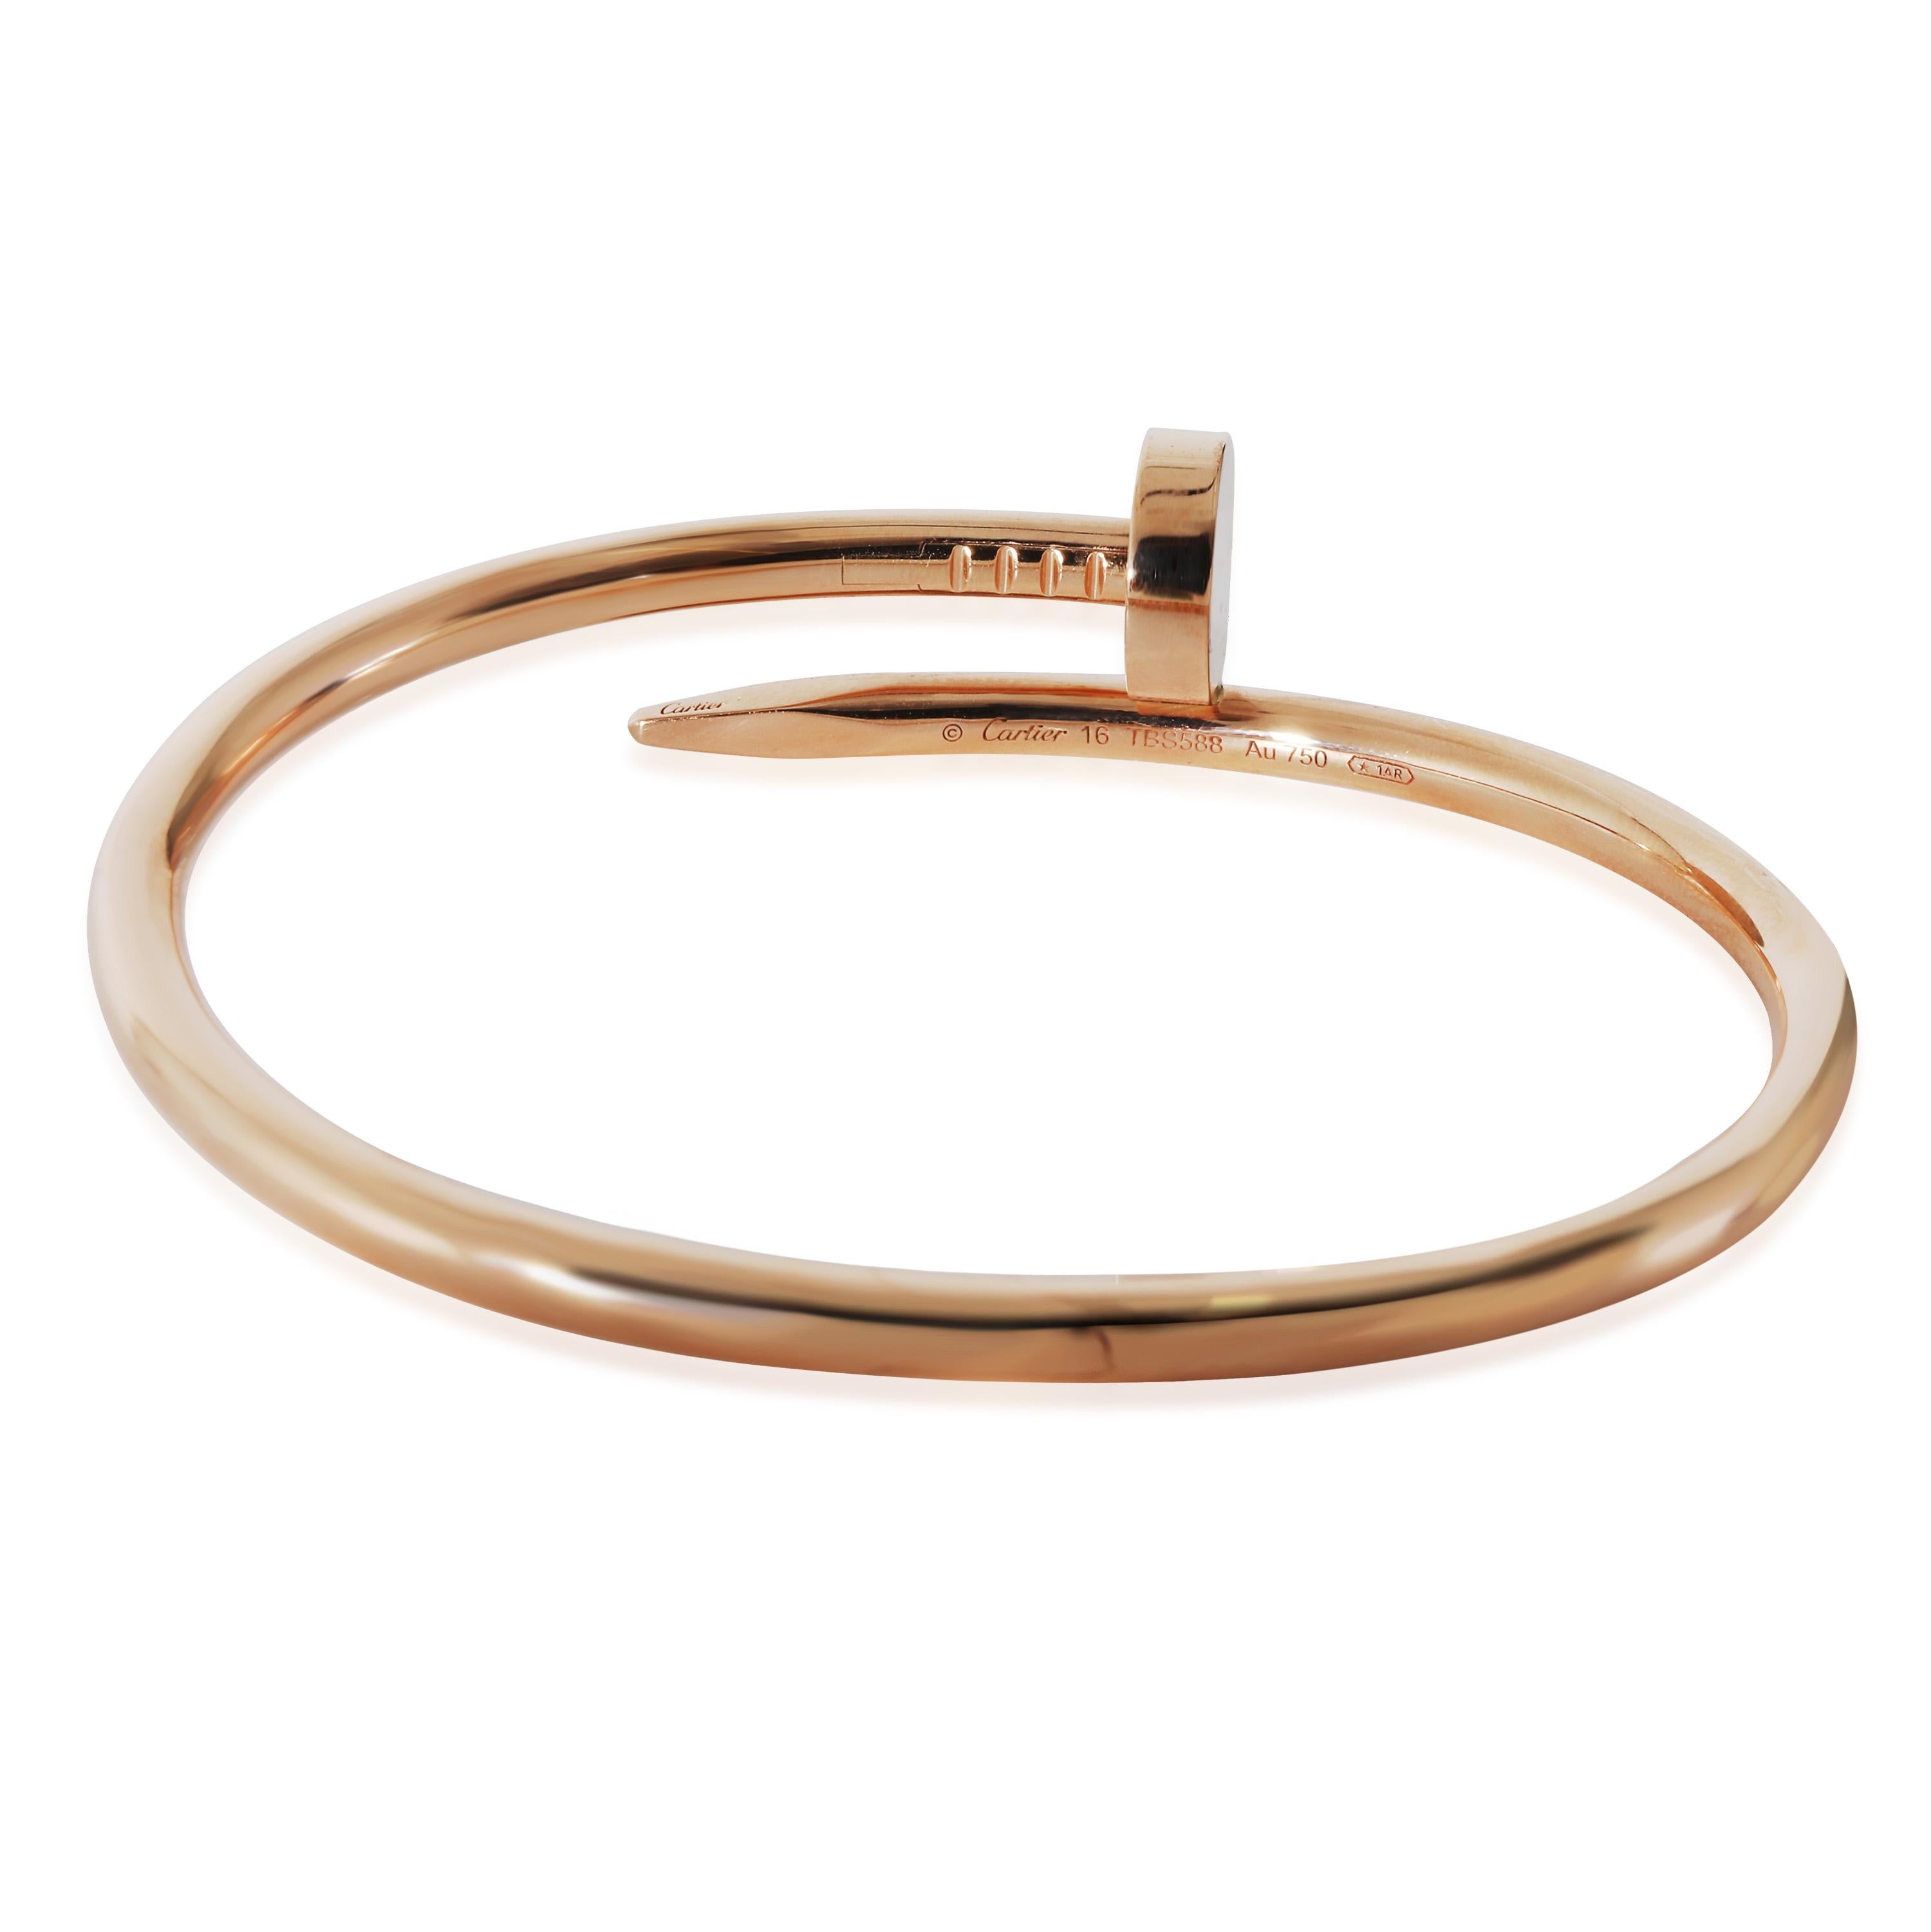 Cartier Juste Un Clou  in 18k Rose Gold

PRIMARY DETAILS
SKU: 134273
Listing Title: Cartier Juste Un Clou  in 18k Rose Gold
Condition Description: Translating to 'just a nail', the Juste Un Clou collection from Cartier is one of the Maison's most